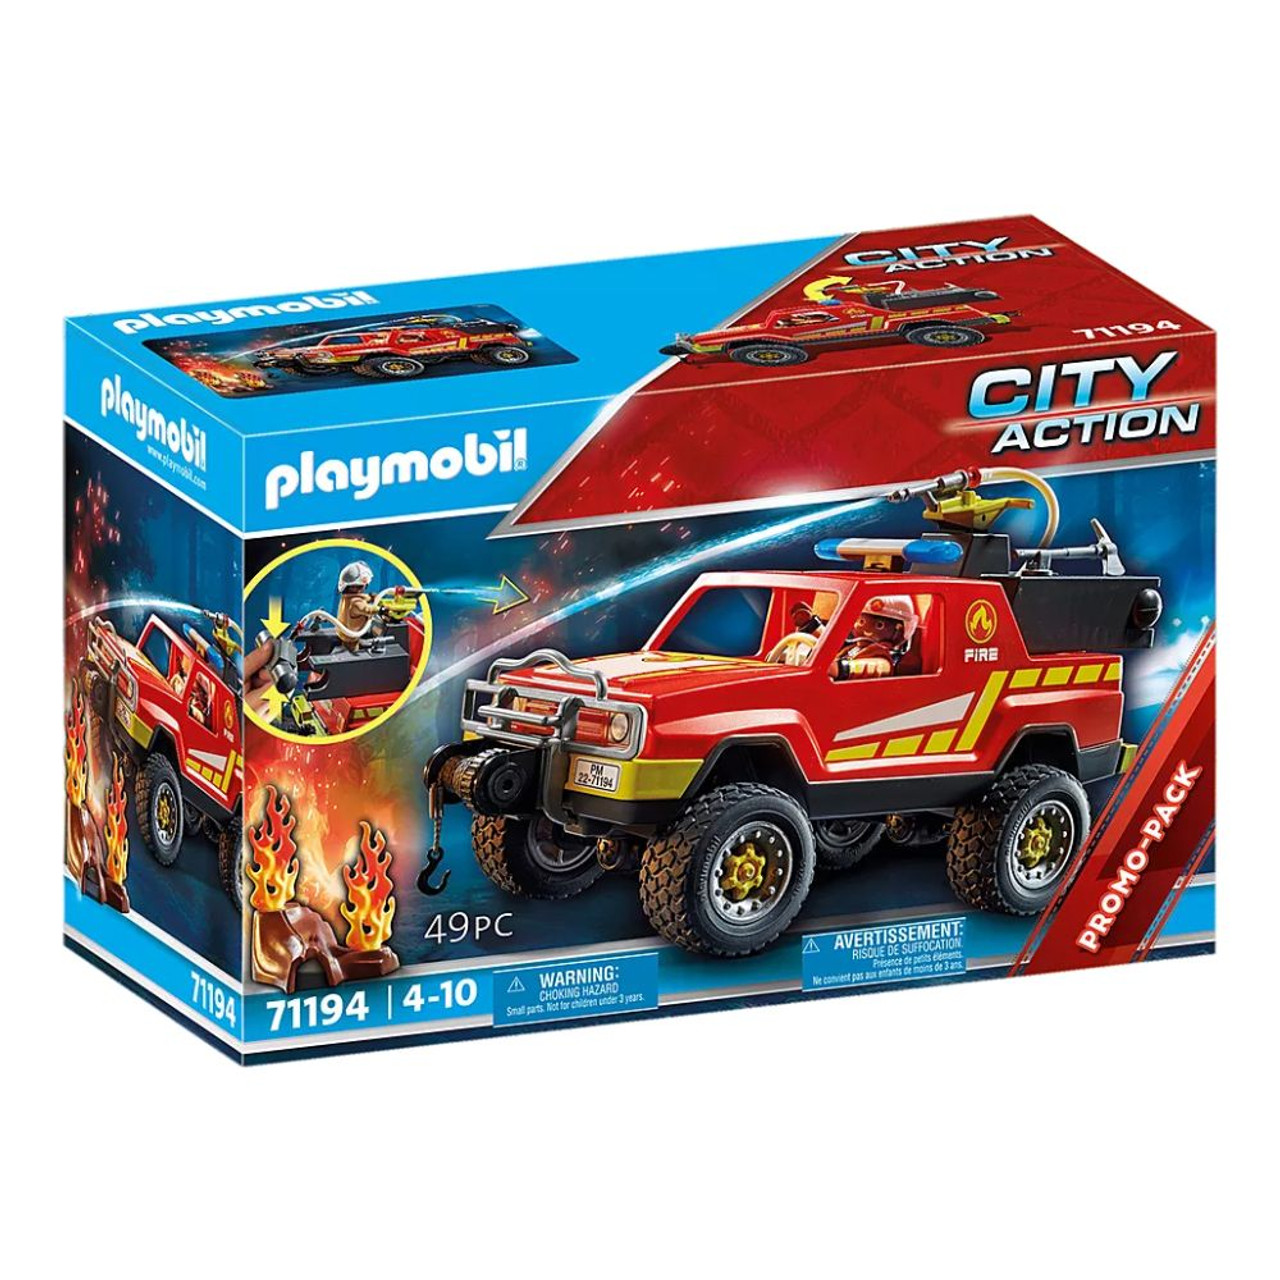 Playmobil Releases 4 Wheely Great New Truck Sets - The Toy Insider